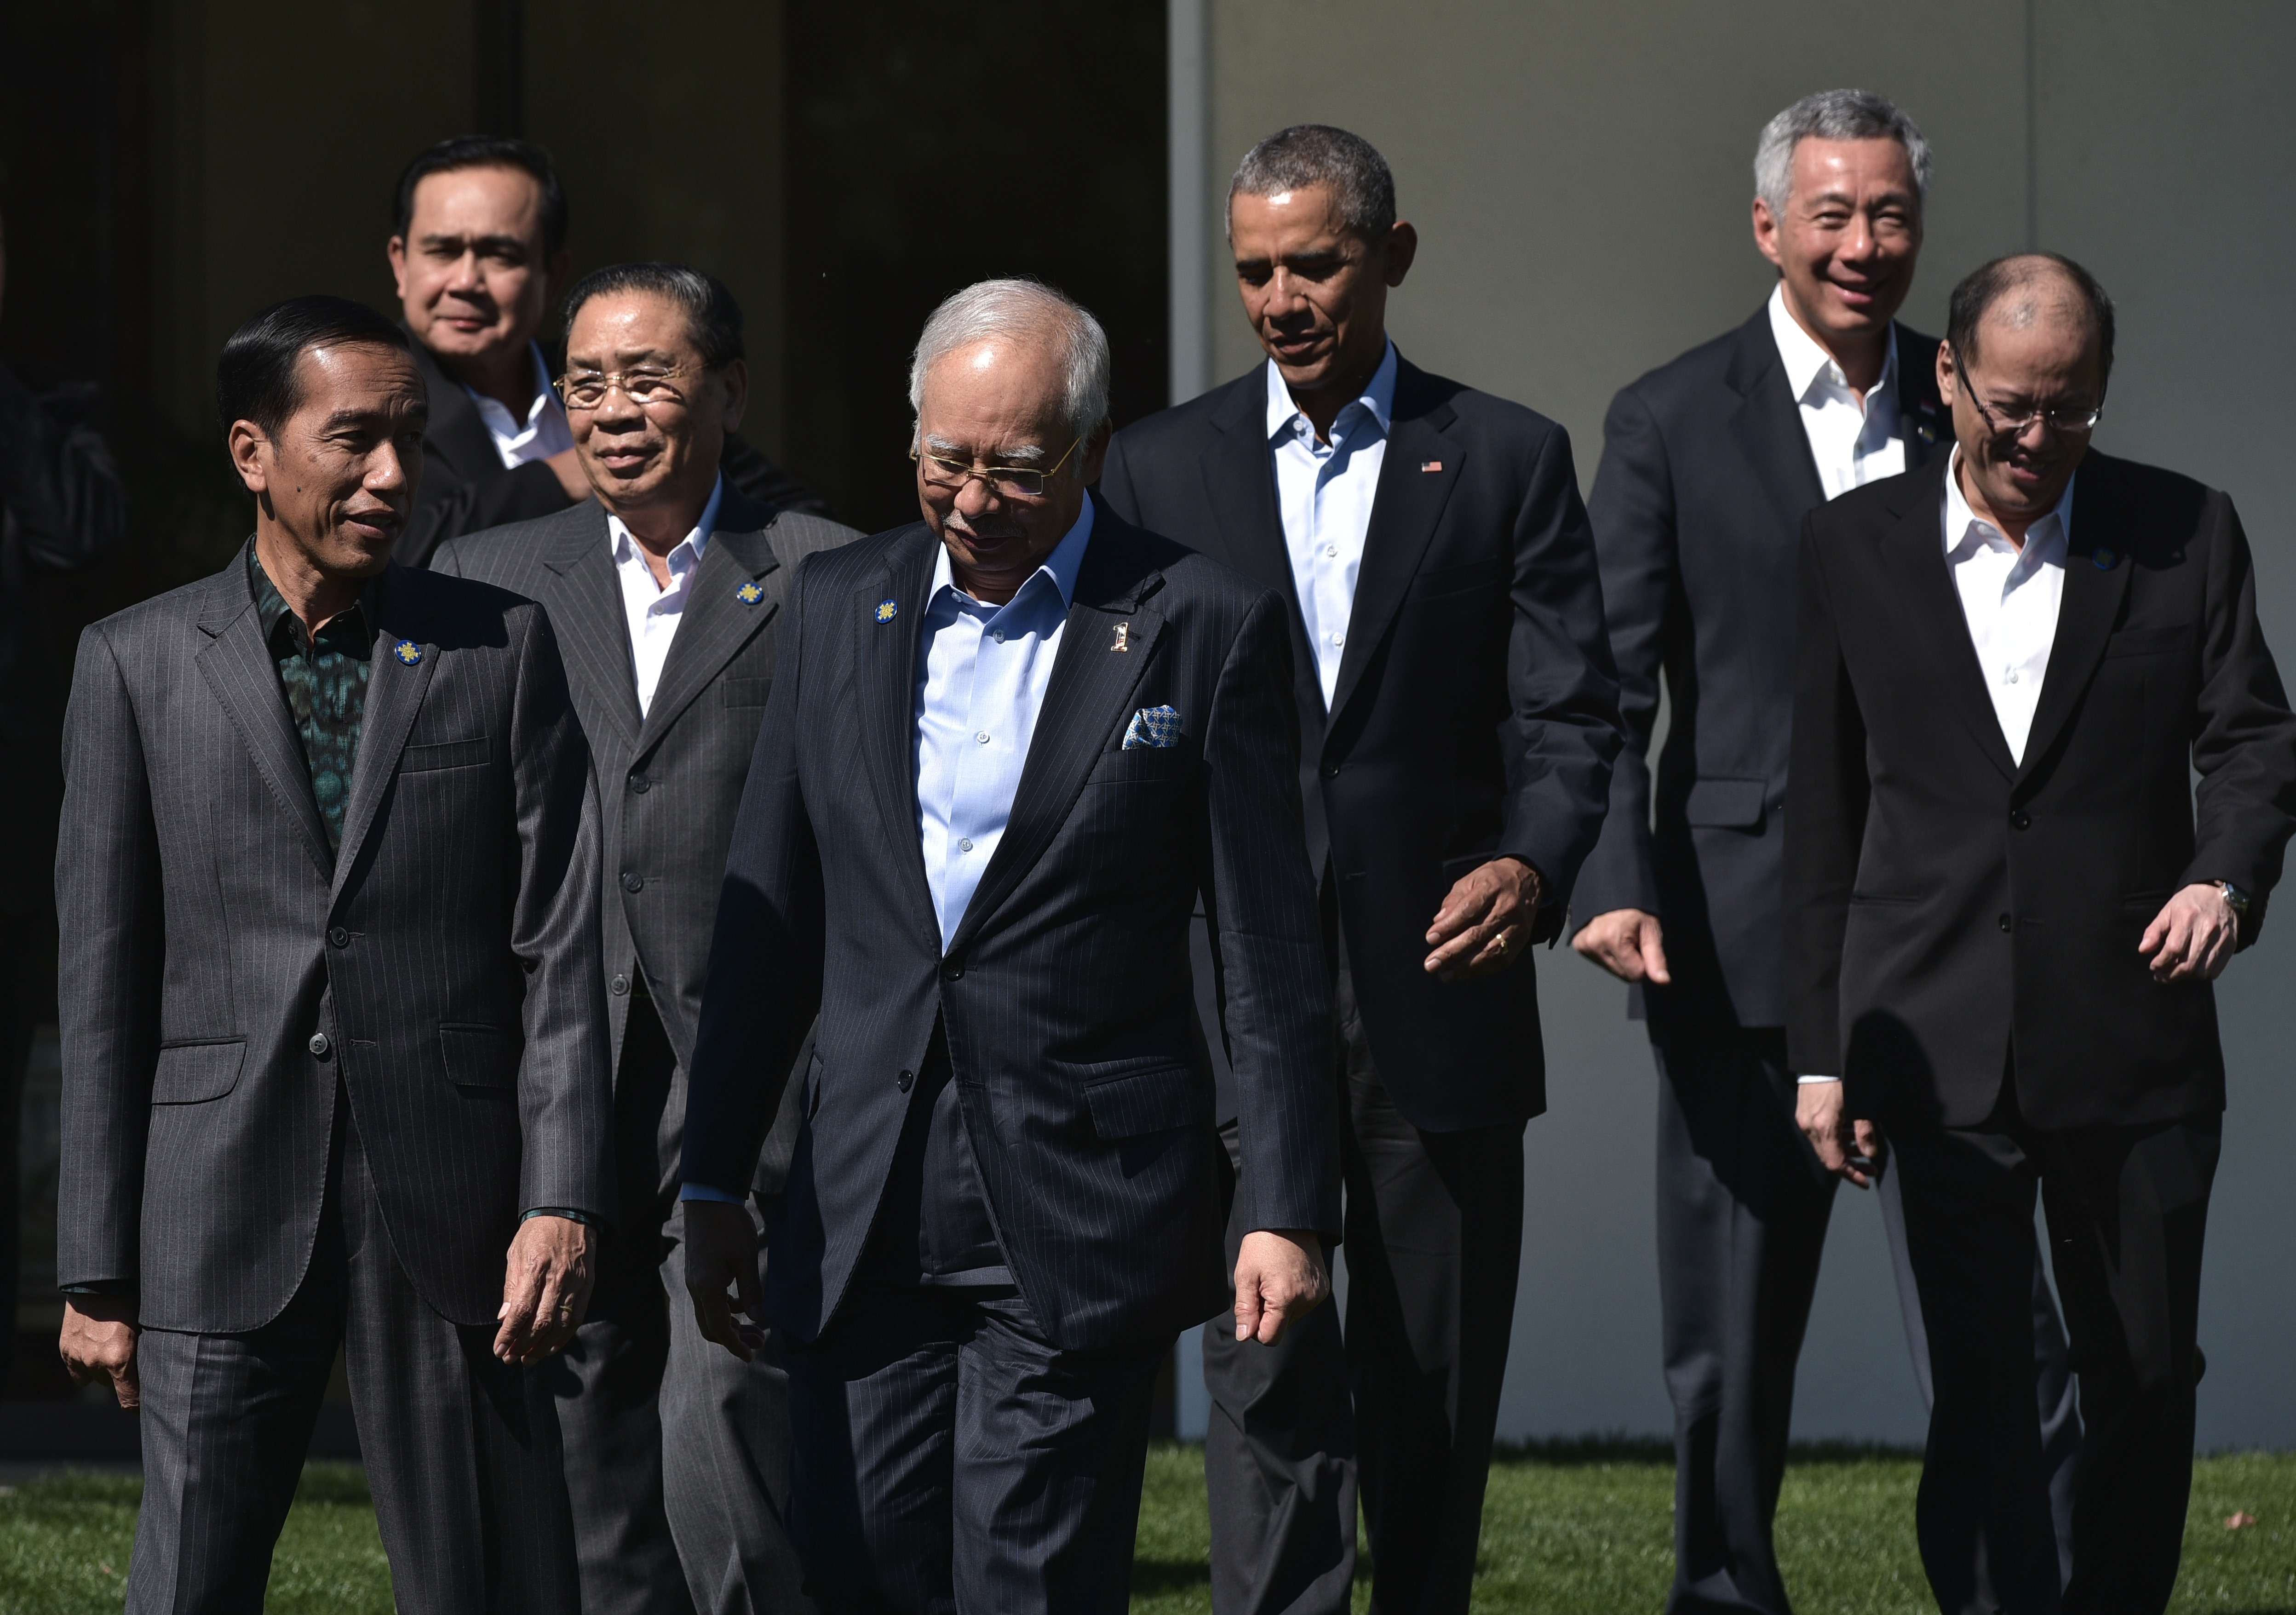 From left: Indonesia’s President Joko Widodo, Laos’ President Choummaly Sayasone, Malaysia’s Prime Minister Najib Razak, US President Barack Obama, Singapore’s Prime Minister Lee Hsien Loong and the Philippine’s President Benigno Aquino attend an Asean meeting in California this year. Photo: AFP